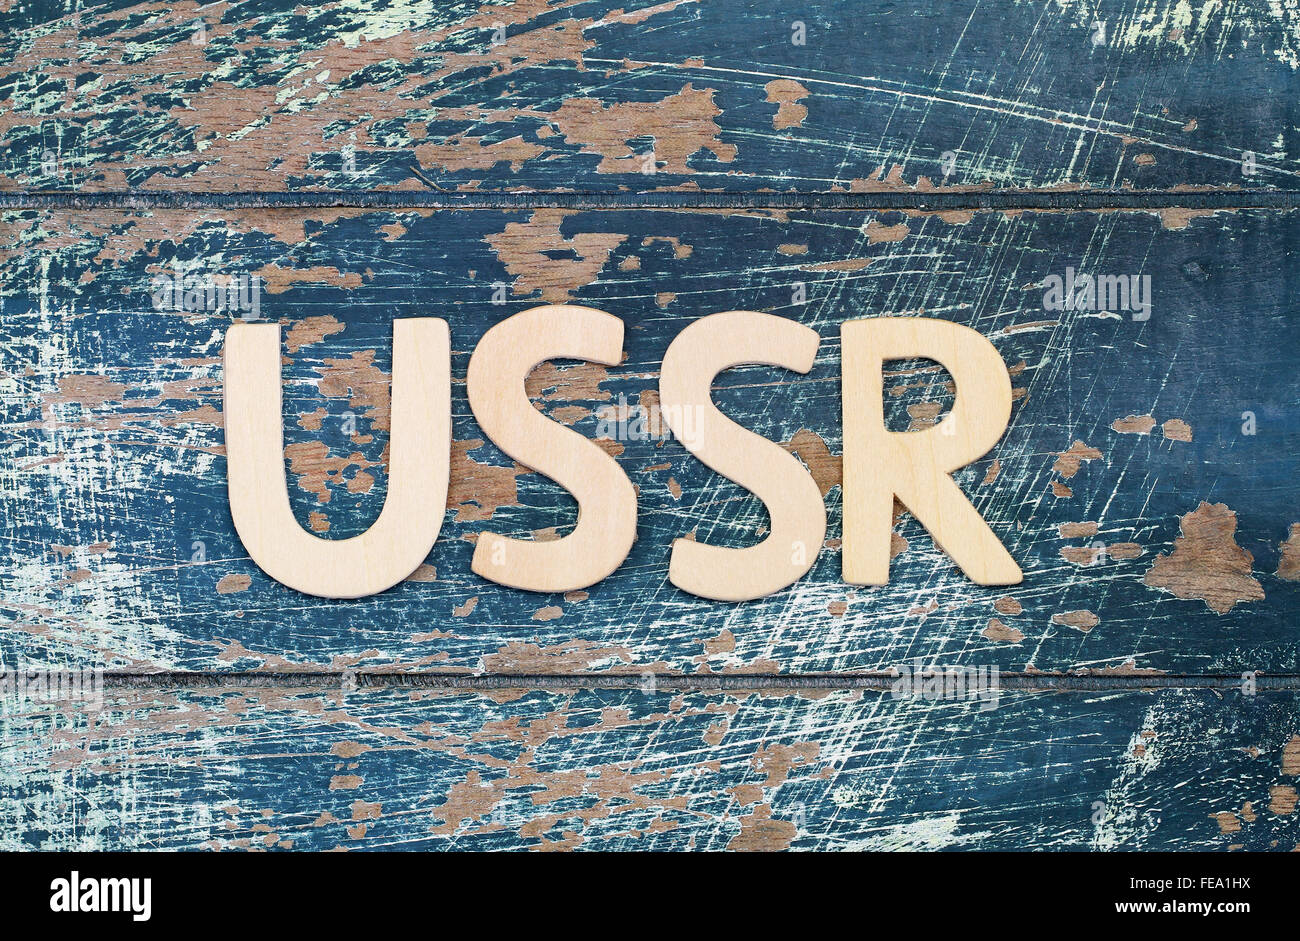 USSR written with wooden letters on rustic surface Stock Photo